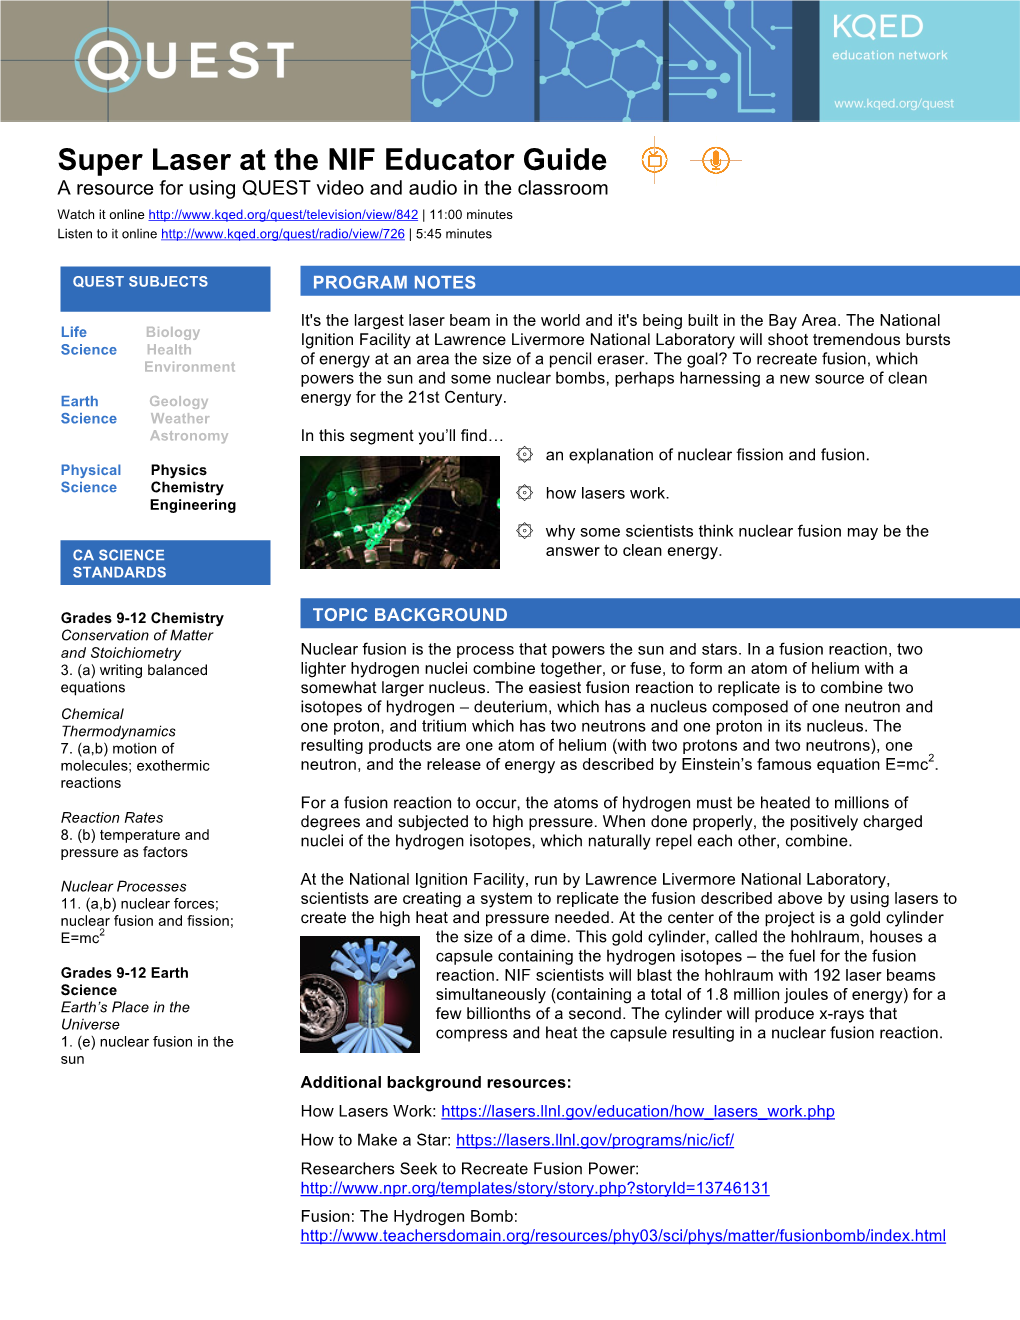 Super Laser at the NIF Educator Guide